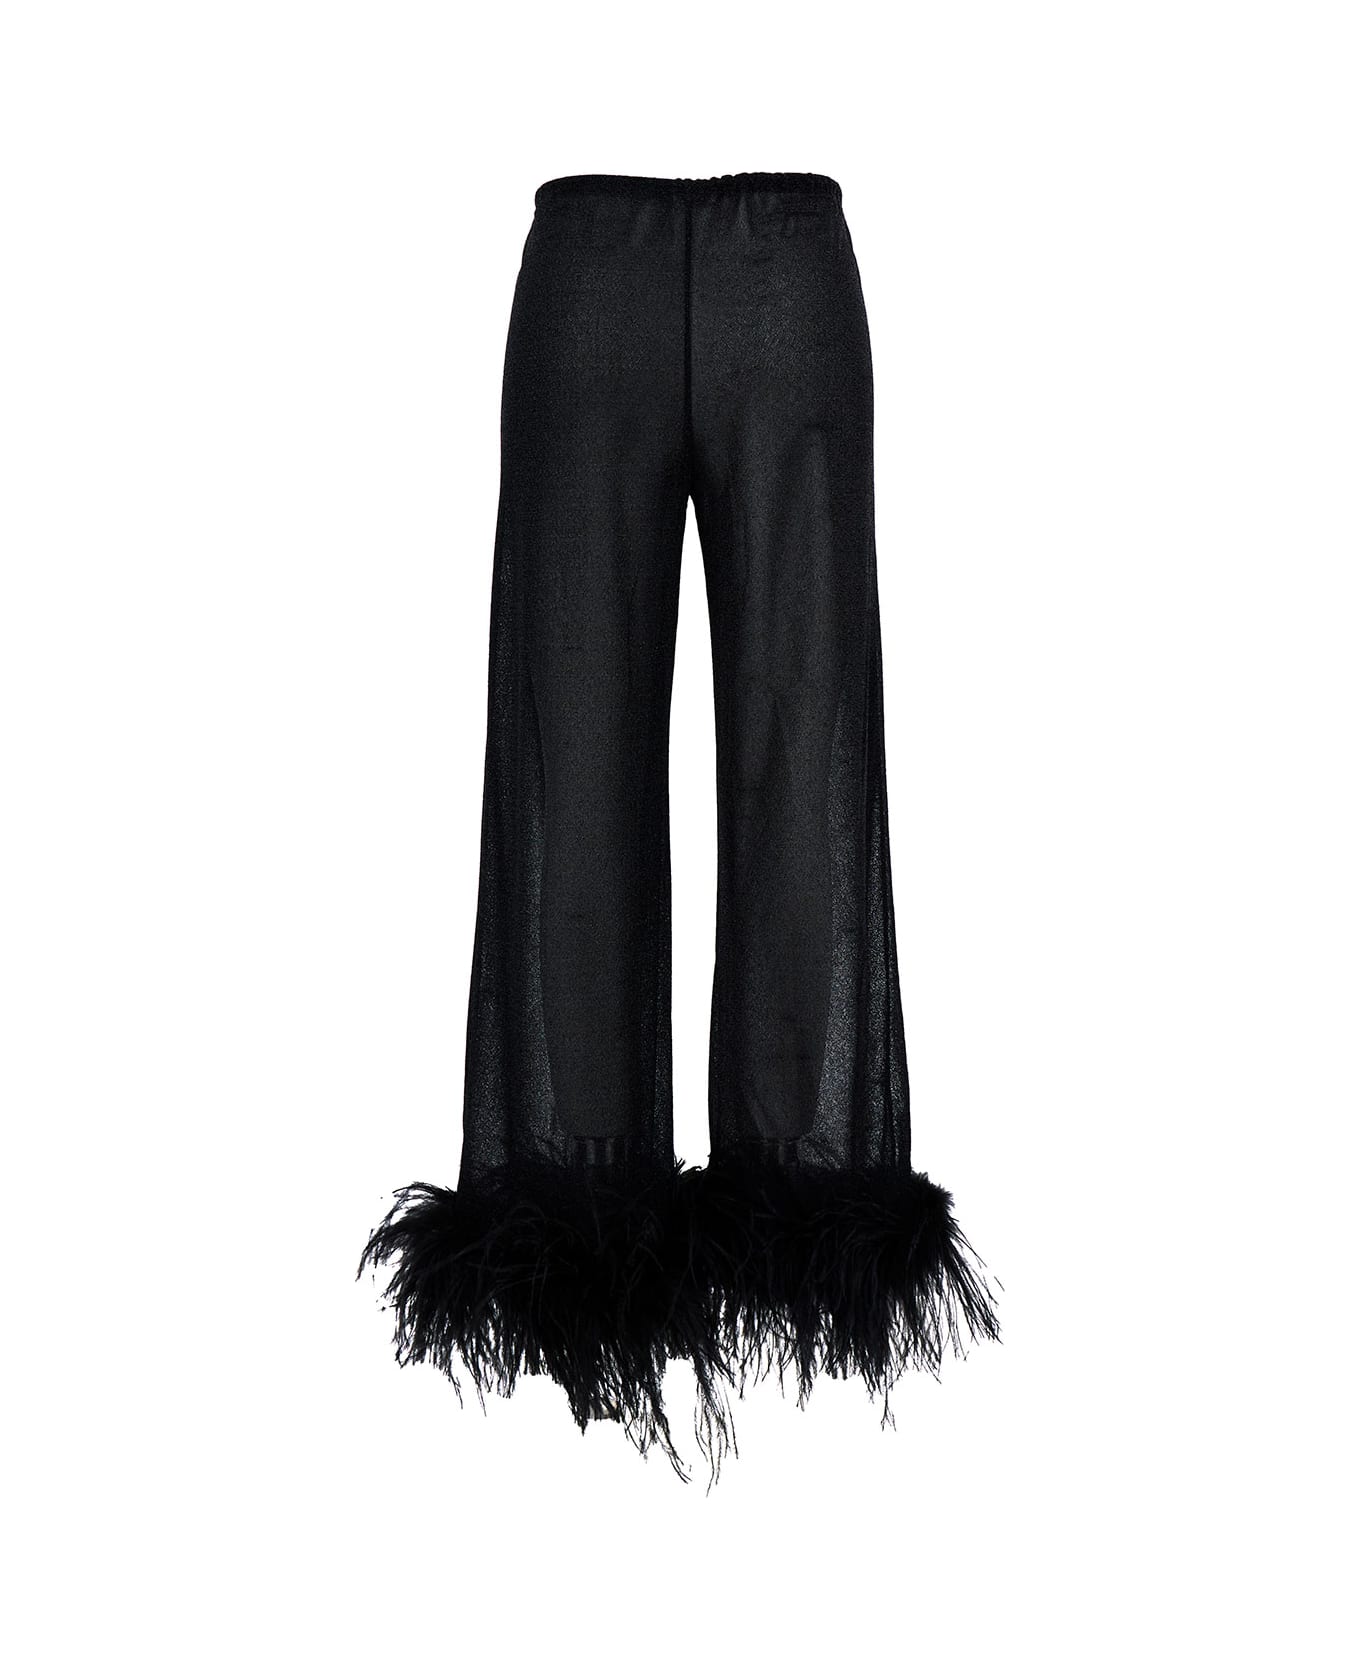 Oseree 'lumière Plumage' Black Pants With Feathers And Drawstring In Polyamide Blend Woman - Black ボトムス